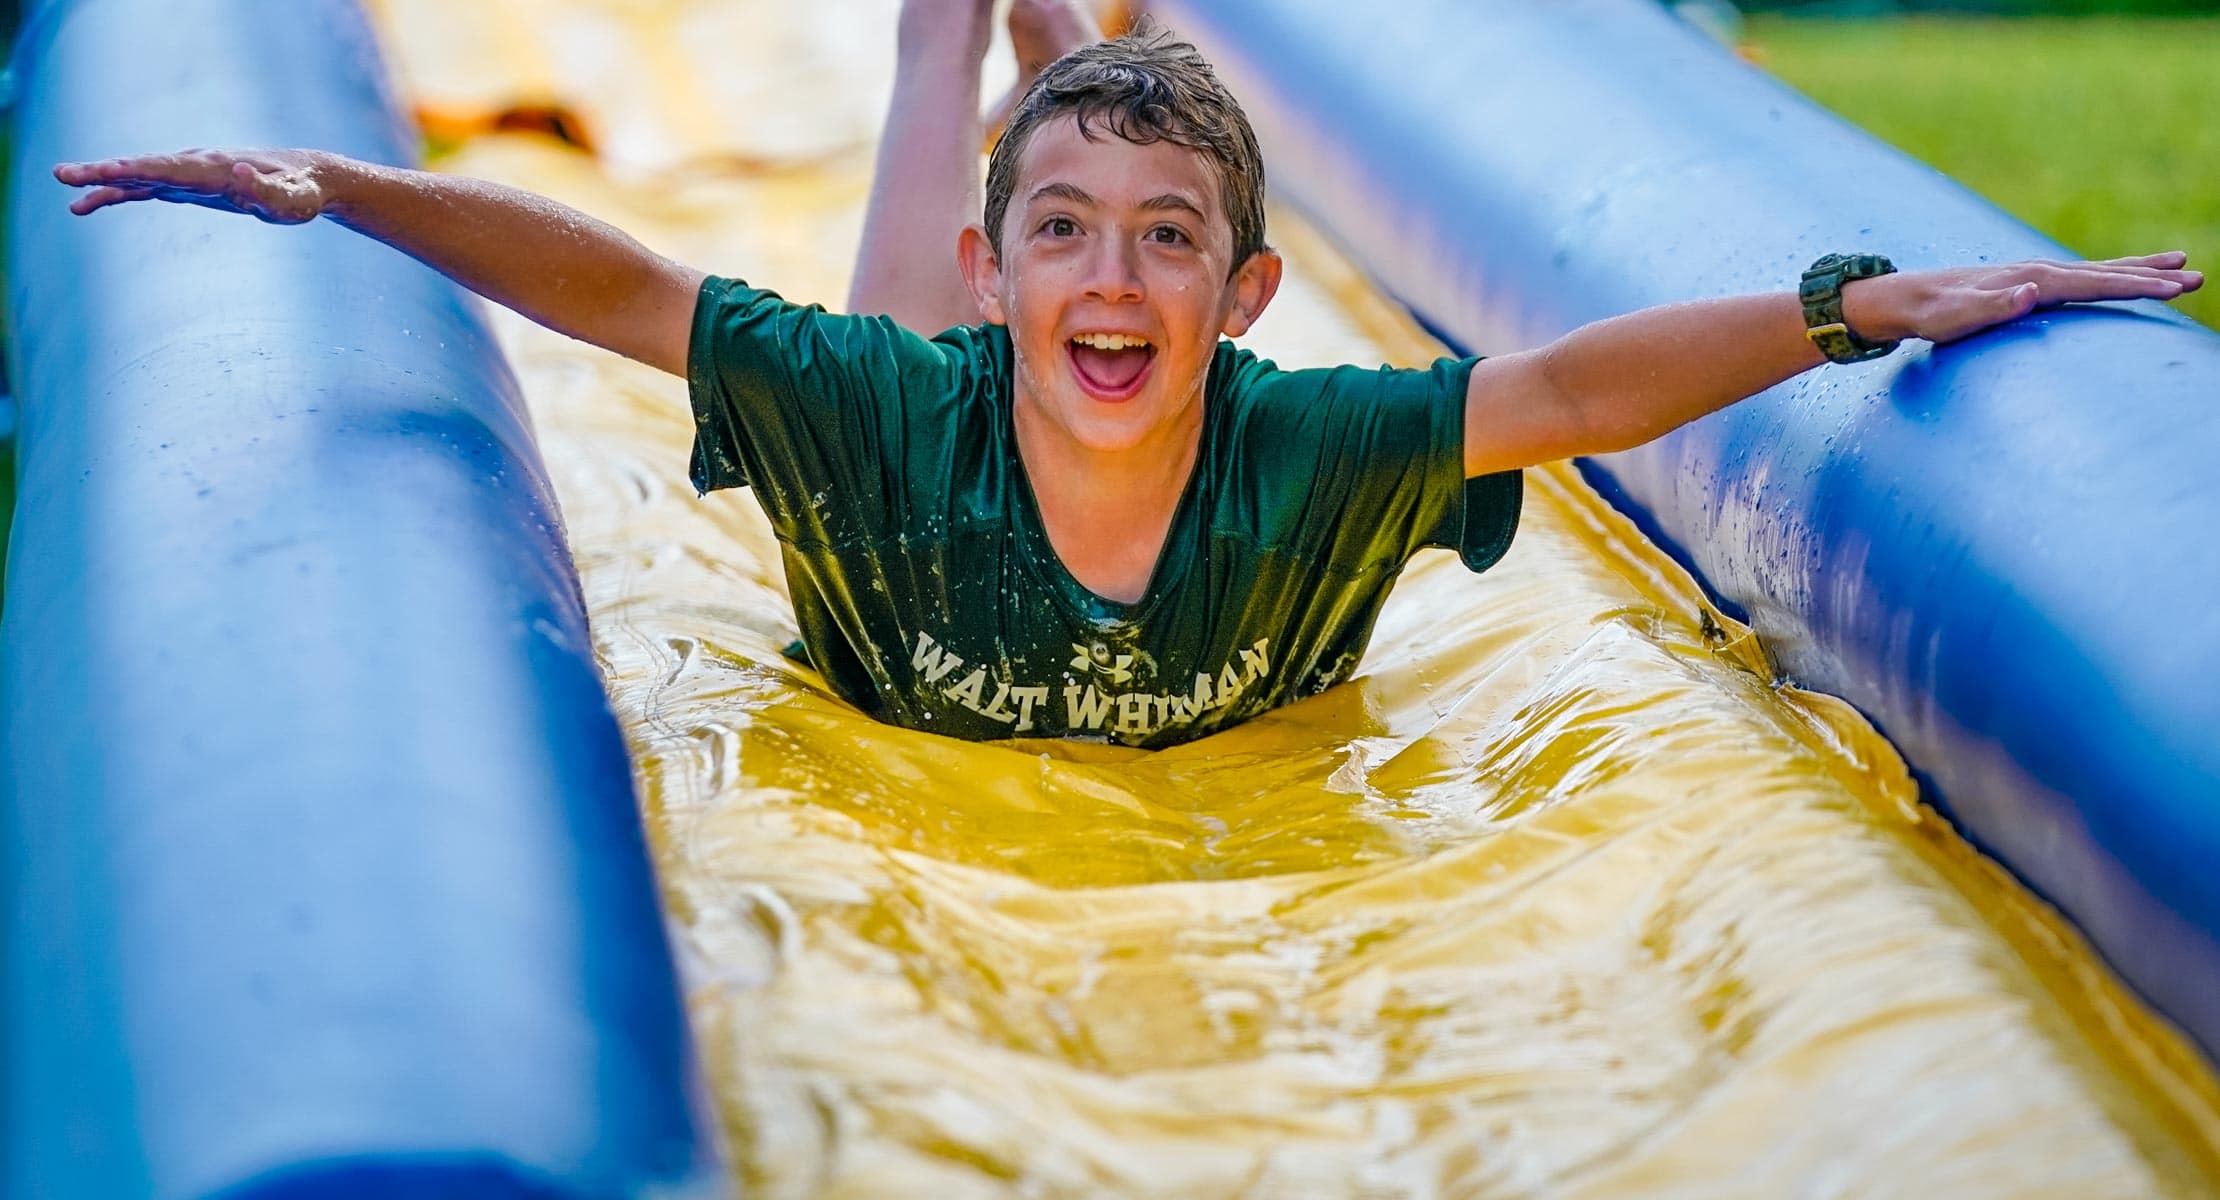 a young boy sliding on a slip n slide smiling at camera with arms outstretched